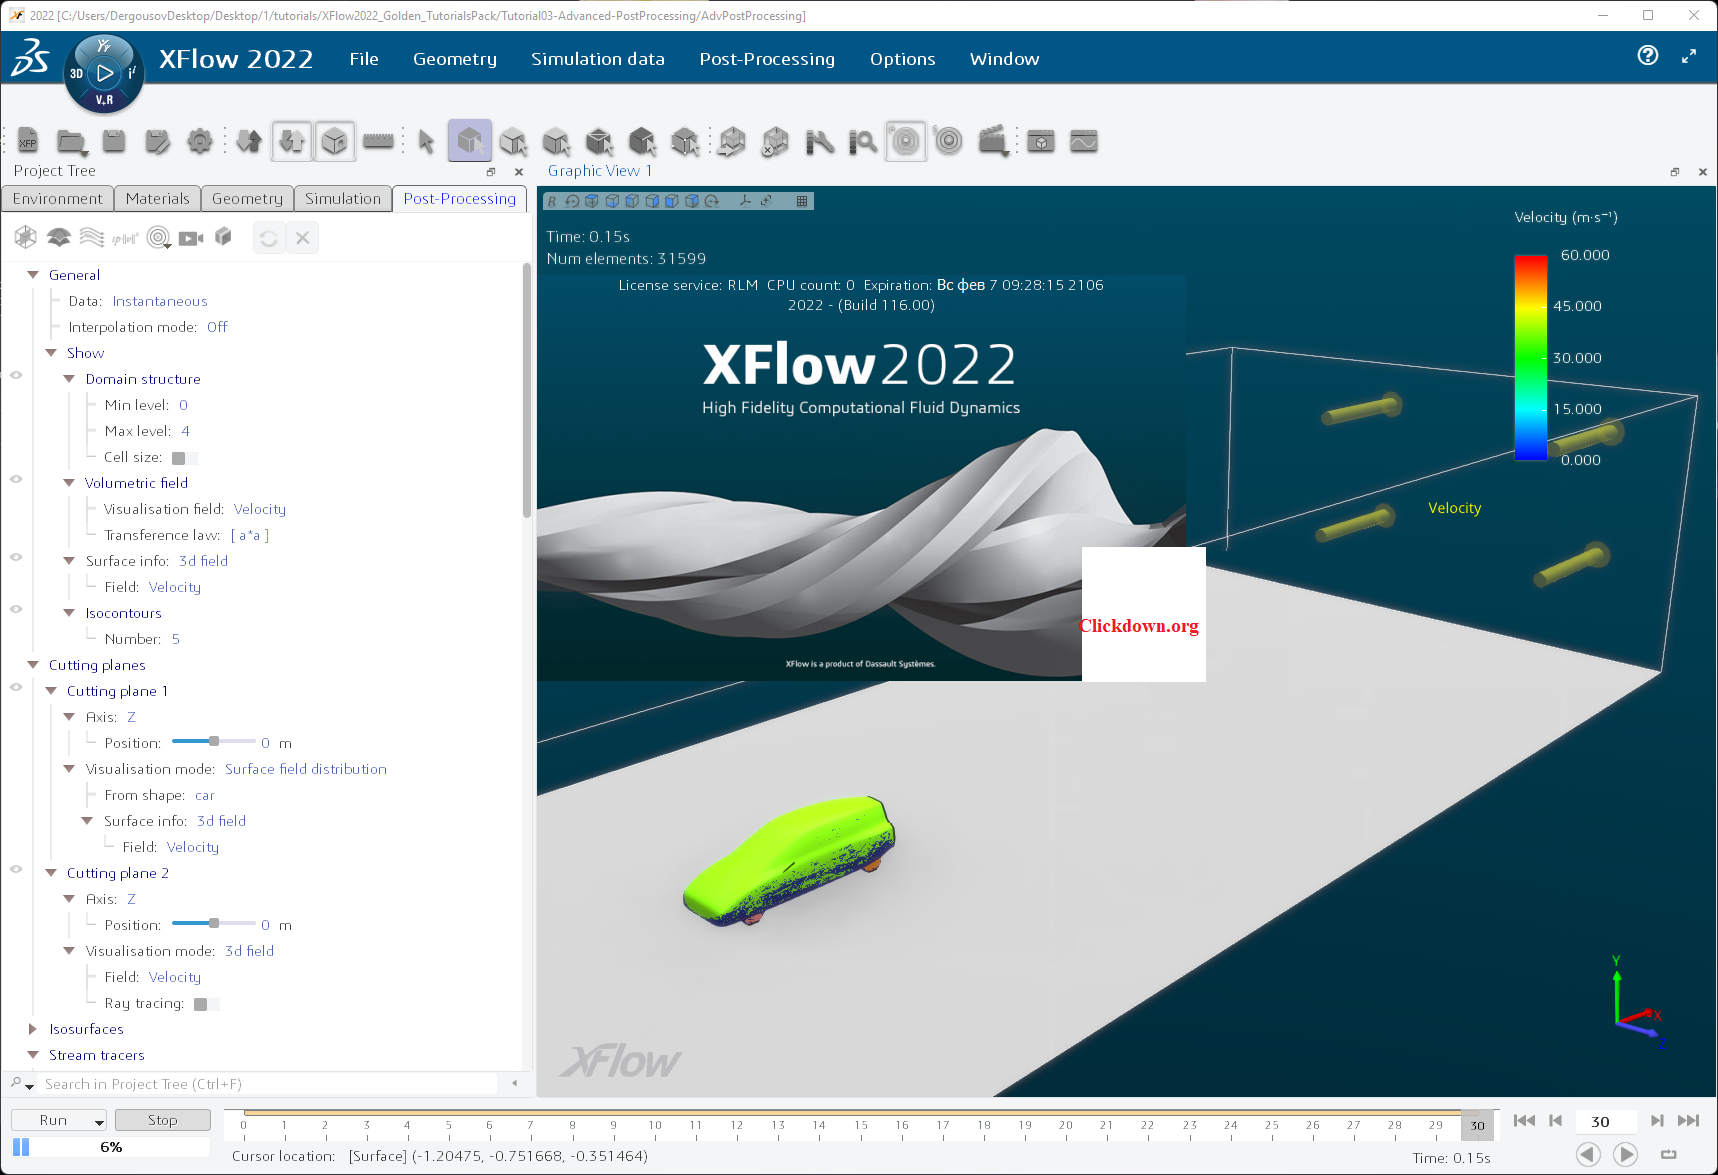 Working with Dassault Systemes SIMULIA XFlow 2022 build 116.00 full